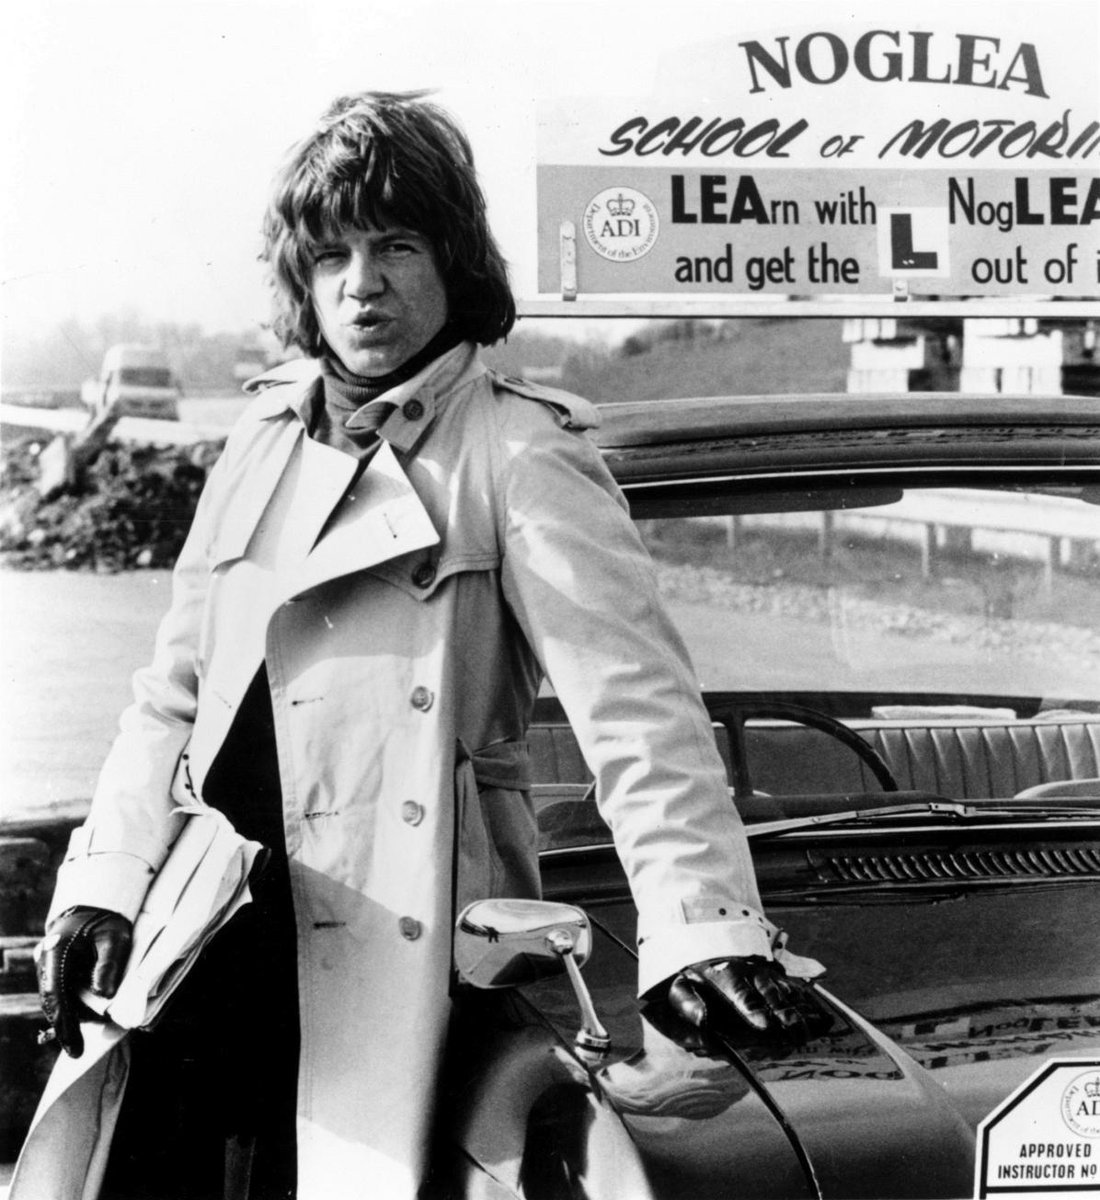 Robin Askwith (@Robin_Askwith) in CONFESSIONS OF A DRIVING INSTRUCTOR (1976), a film by Norman Cohen.